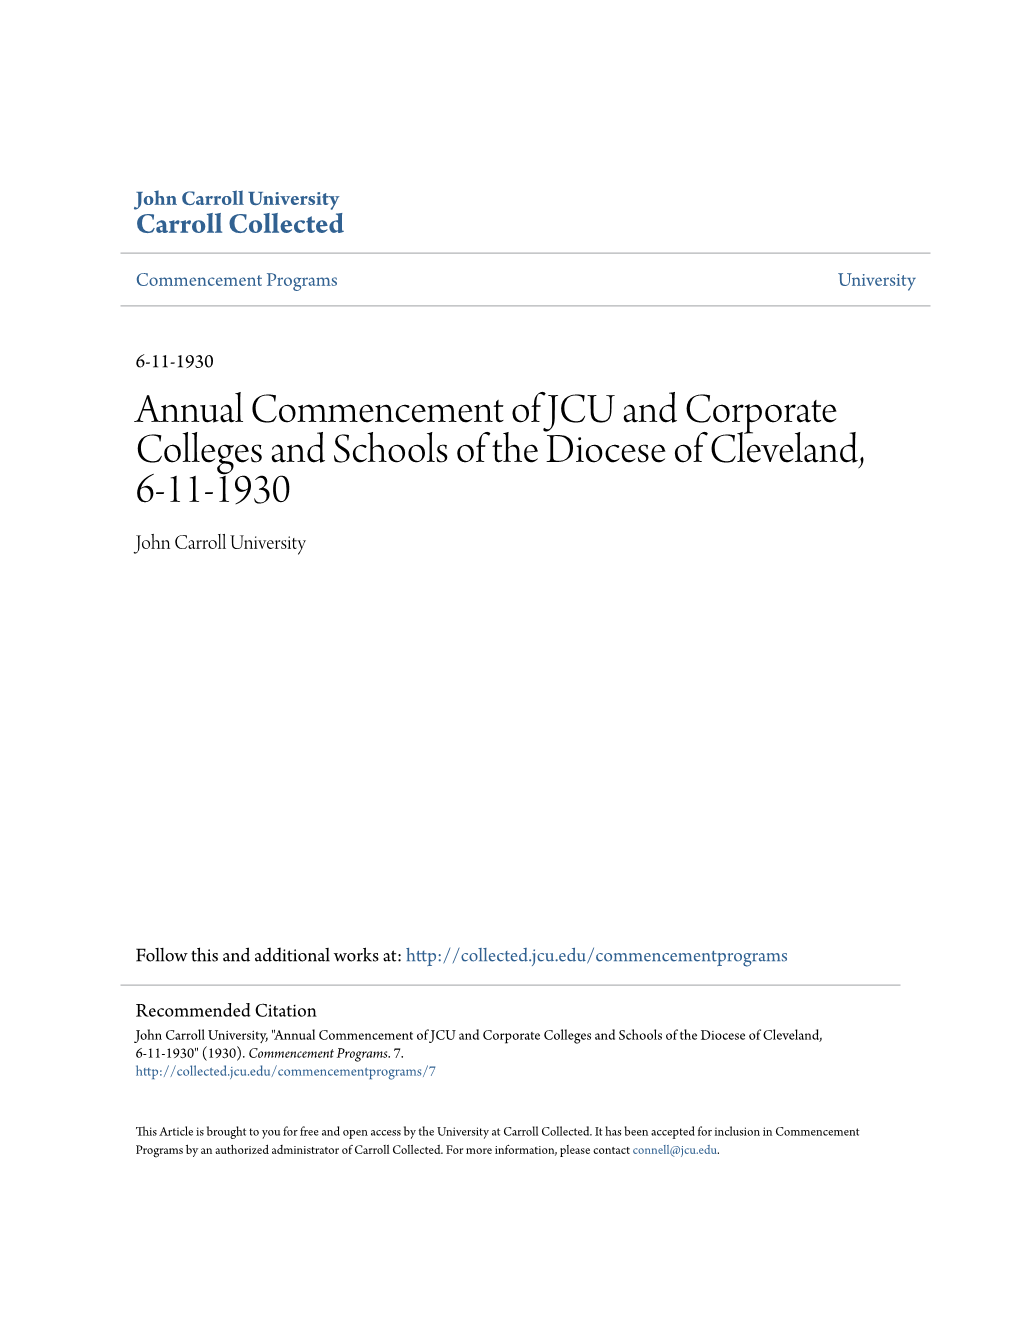 Annual Commencement of JCU and Corporate Colleges and Schools of the Diocese of Cleveland, 6-11-1930 John Carroll University